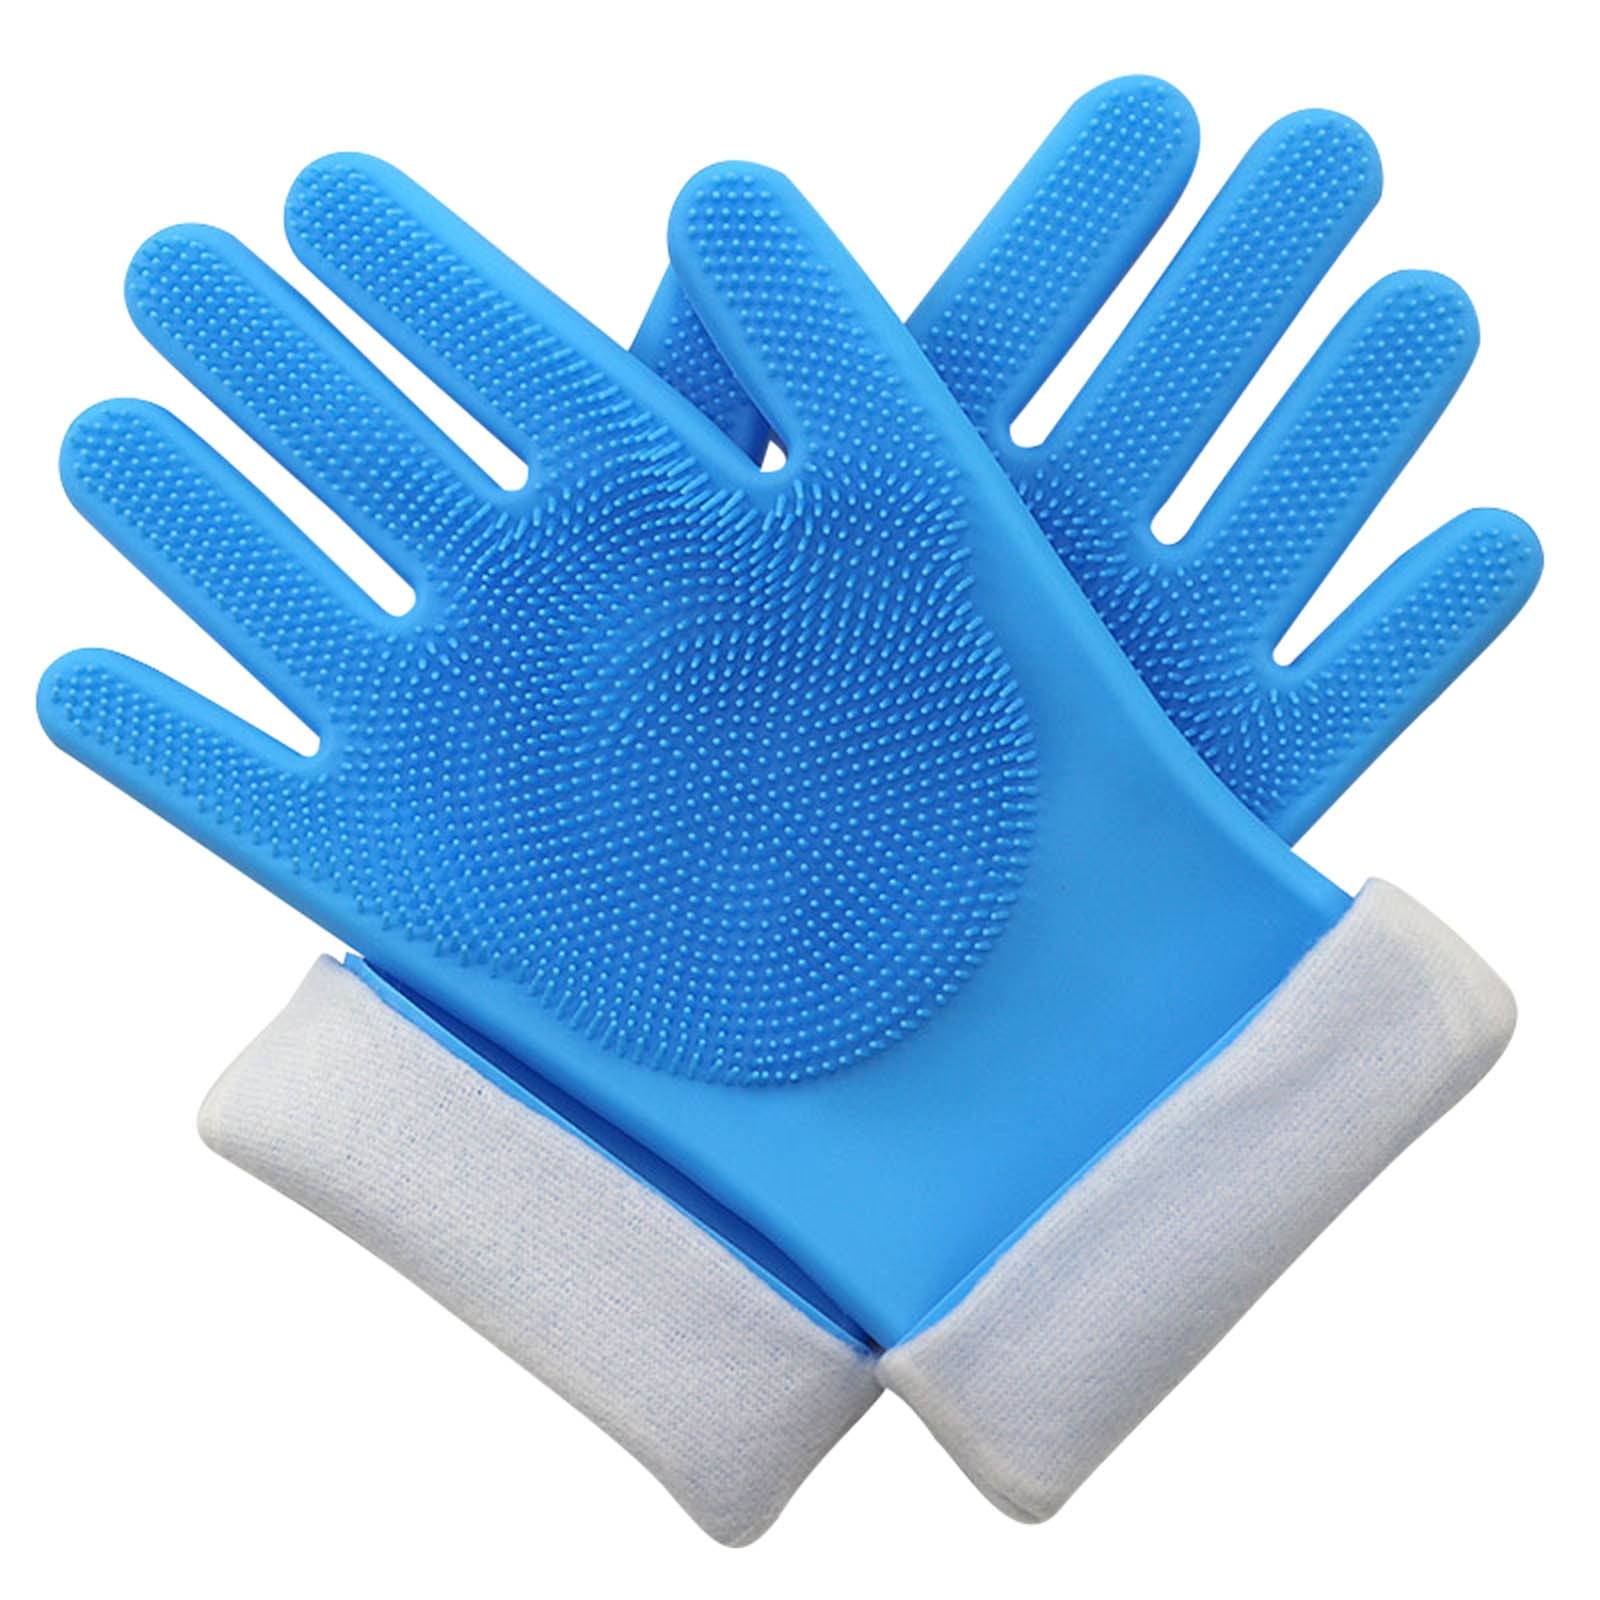 Reusable Silicone Gloves Durable Household Anti-scald Dishwashing Gloves 1 pair 